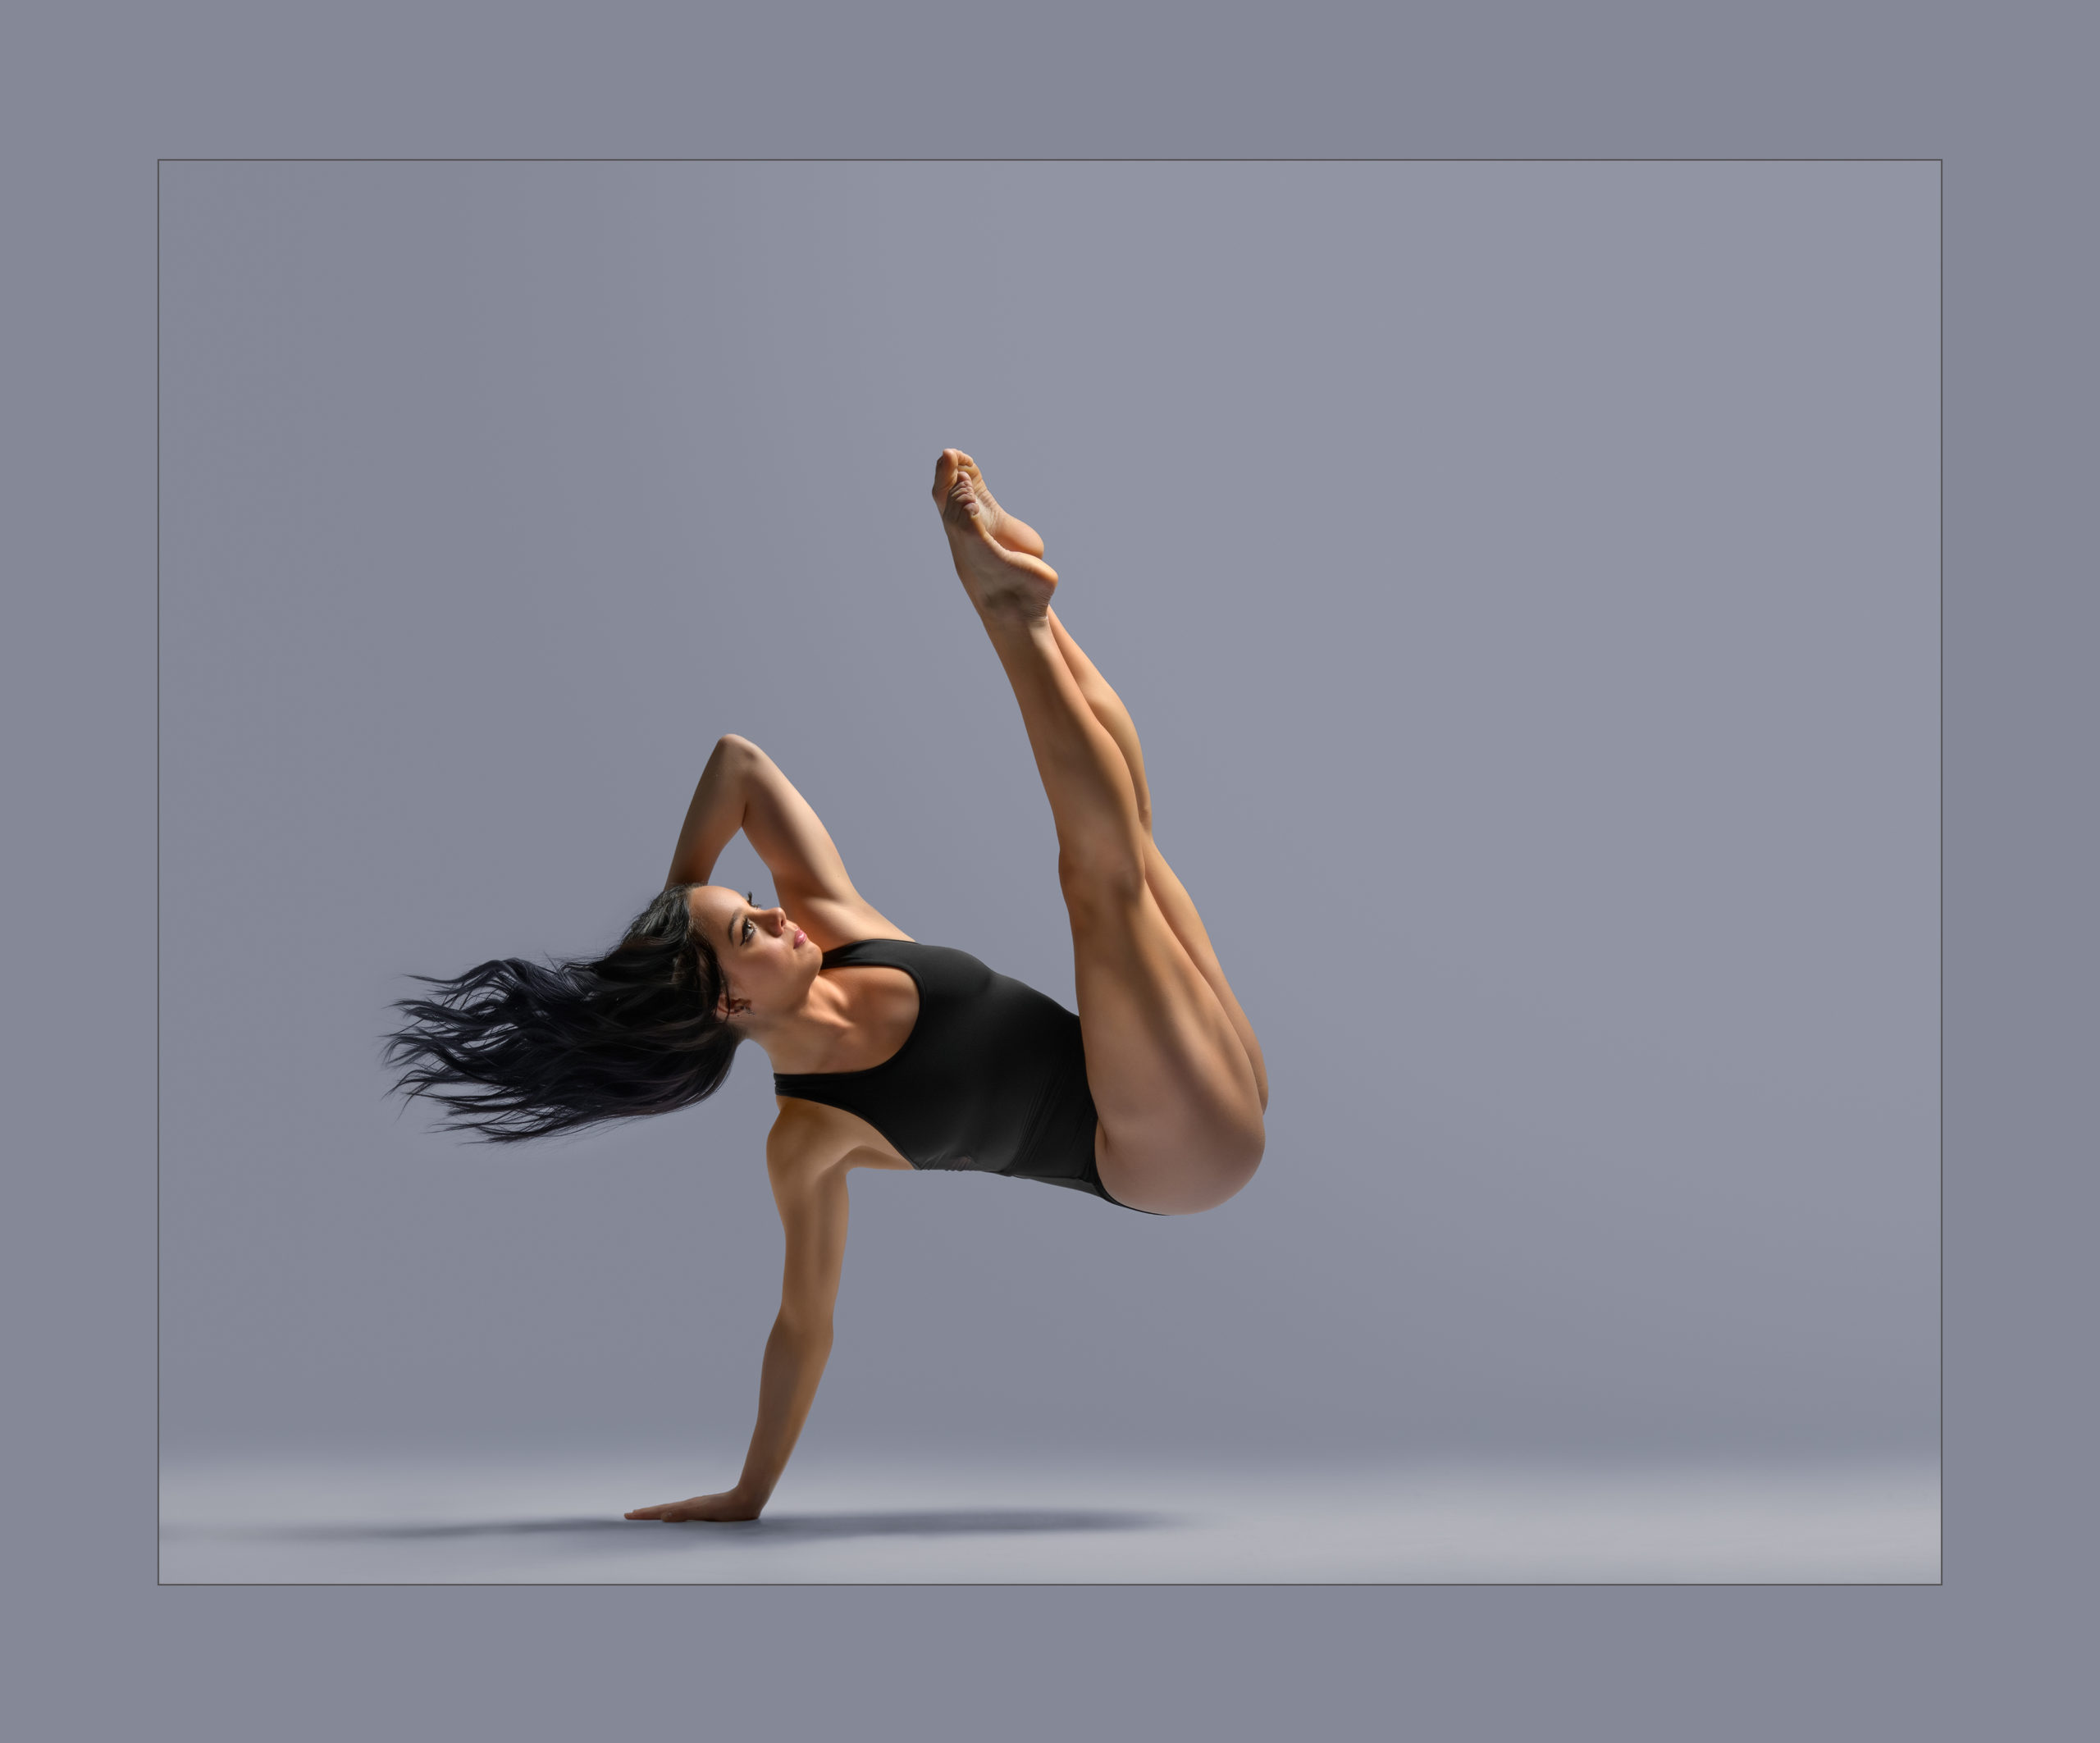 Woman in black leotard pushing up off one hand with other hand behind her head. Legs are kicked up in a pike position.